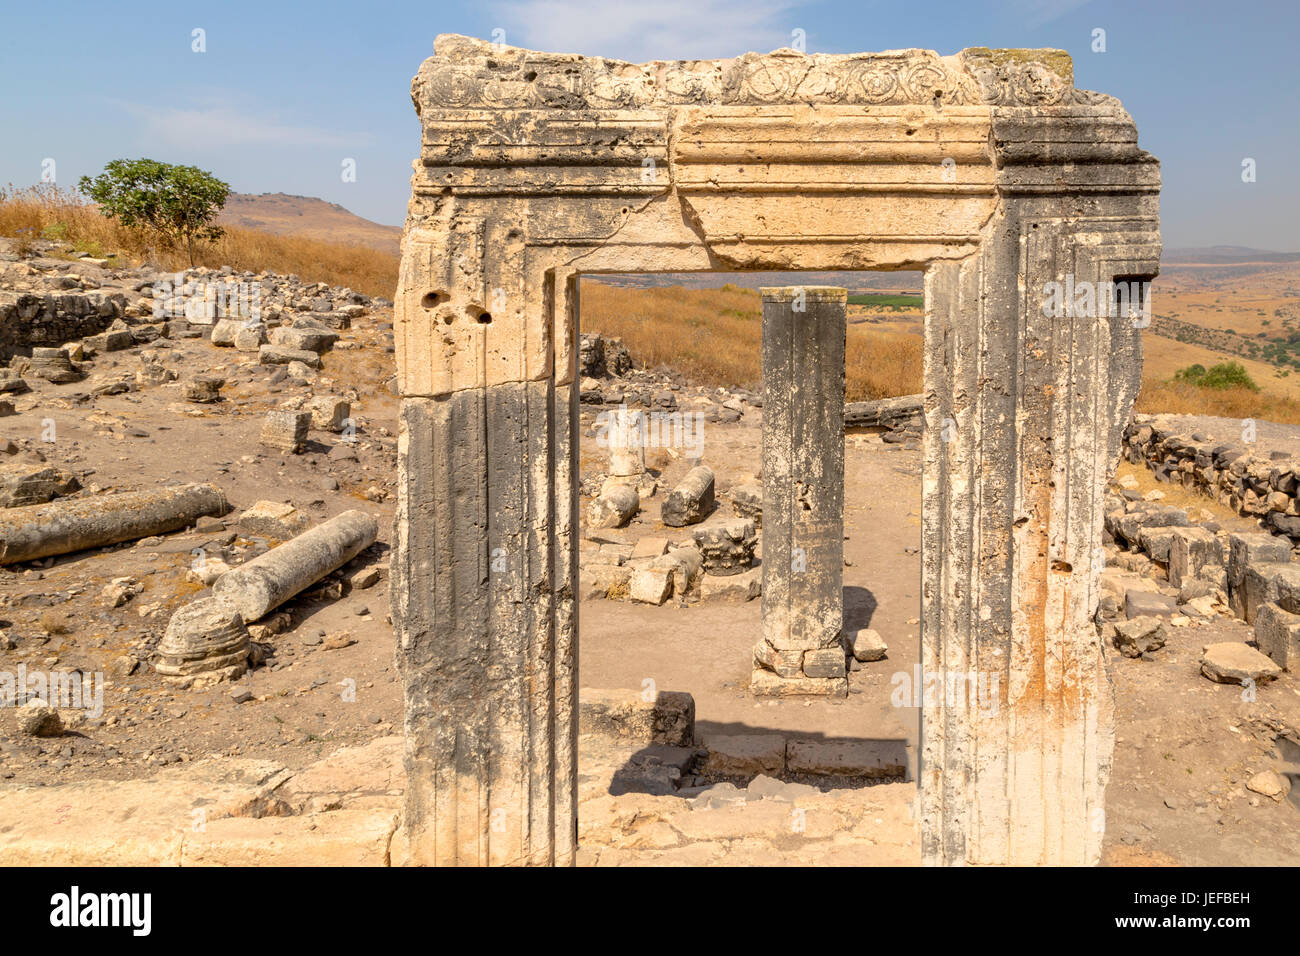 The ruins of an ancient Jewish settlement with a synagogue from the fourth century CE with columns, Mount Arbel, Israel. Stock Photo